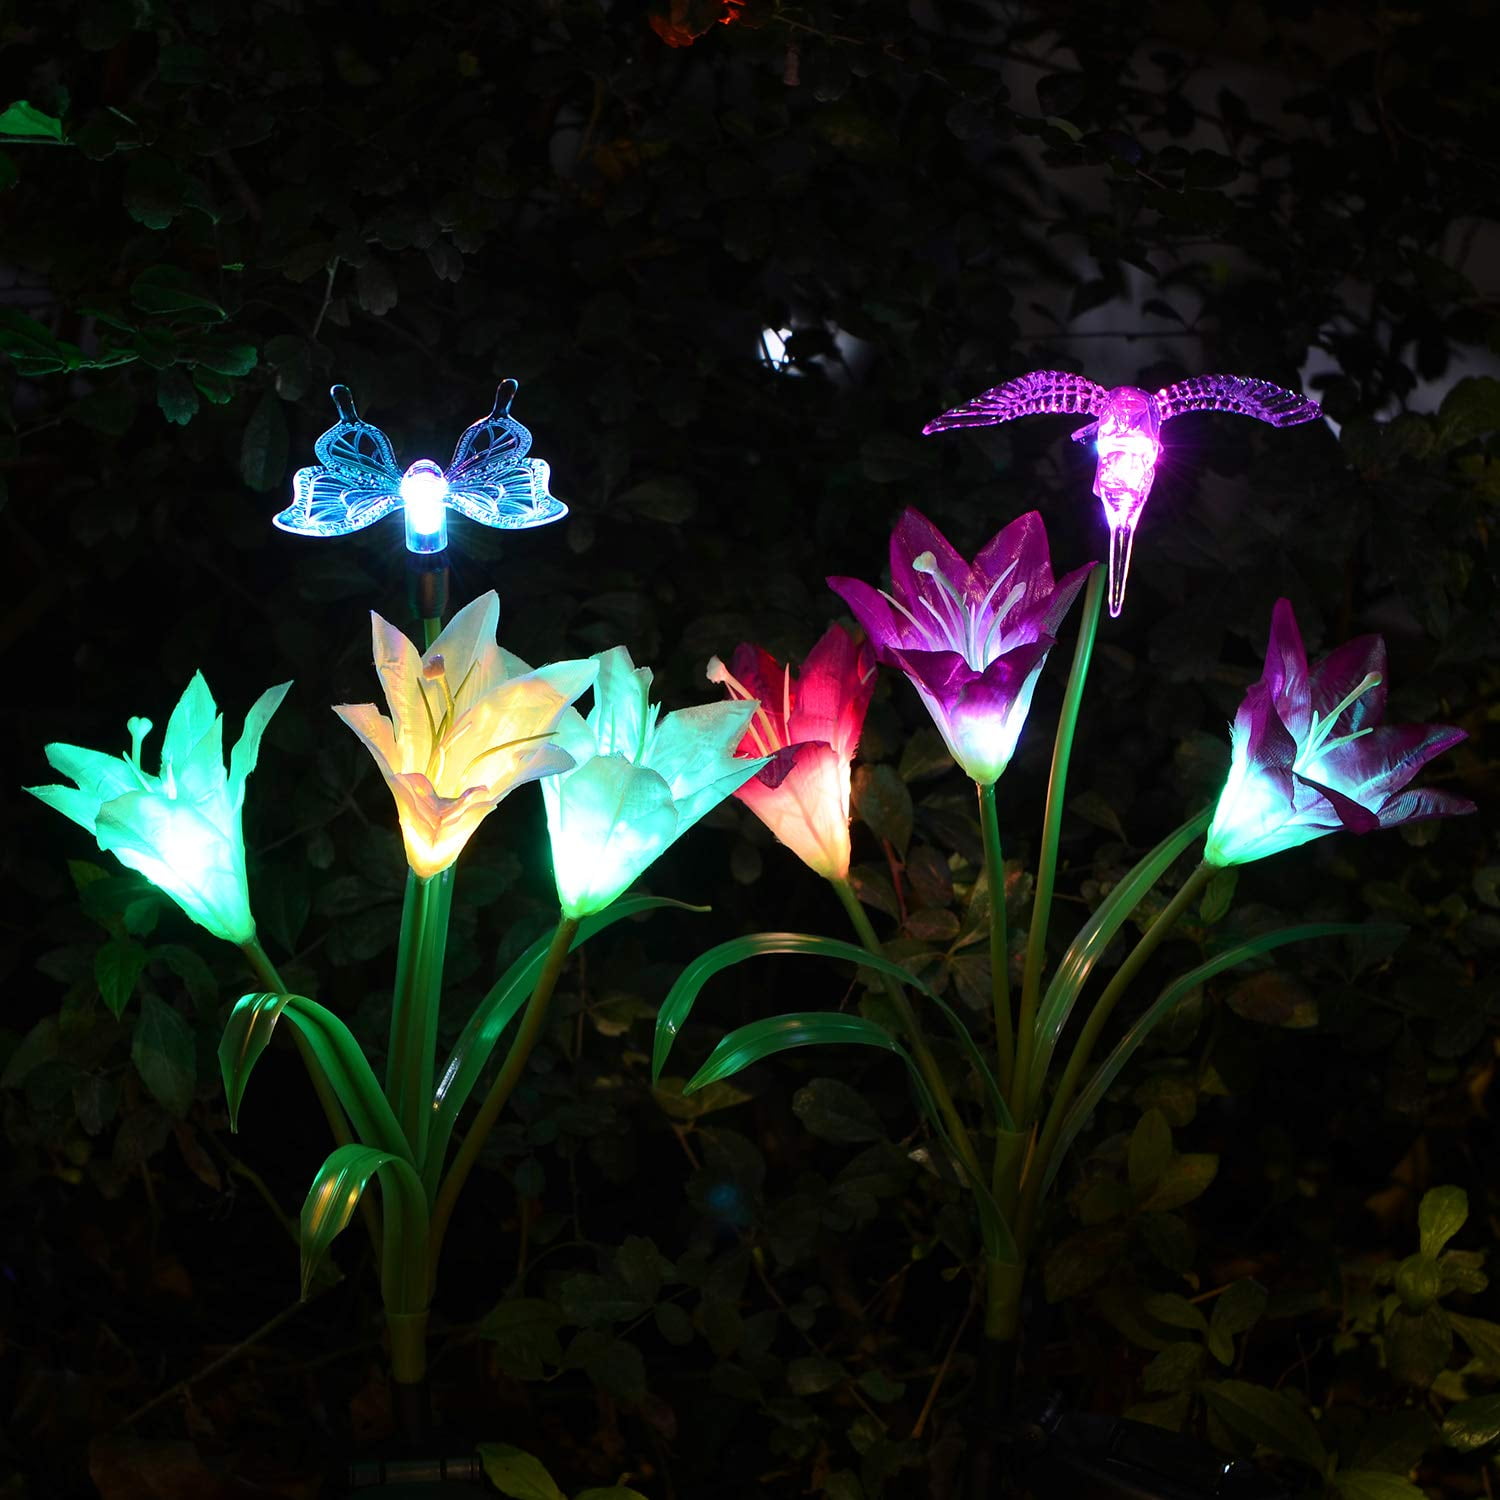 MOPHA Solar Lights Outdoor Garden,2 Pack Solar Flower Lights with Multi Color Changing Solar Garden Lights for Wider Solar Panel for Garden Patio Decoration Waterproof/Sunscreen